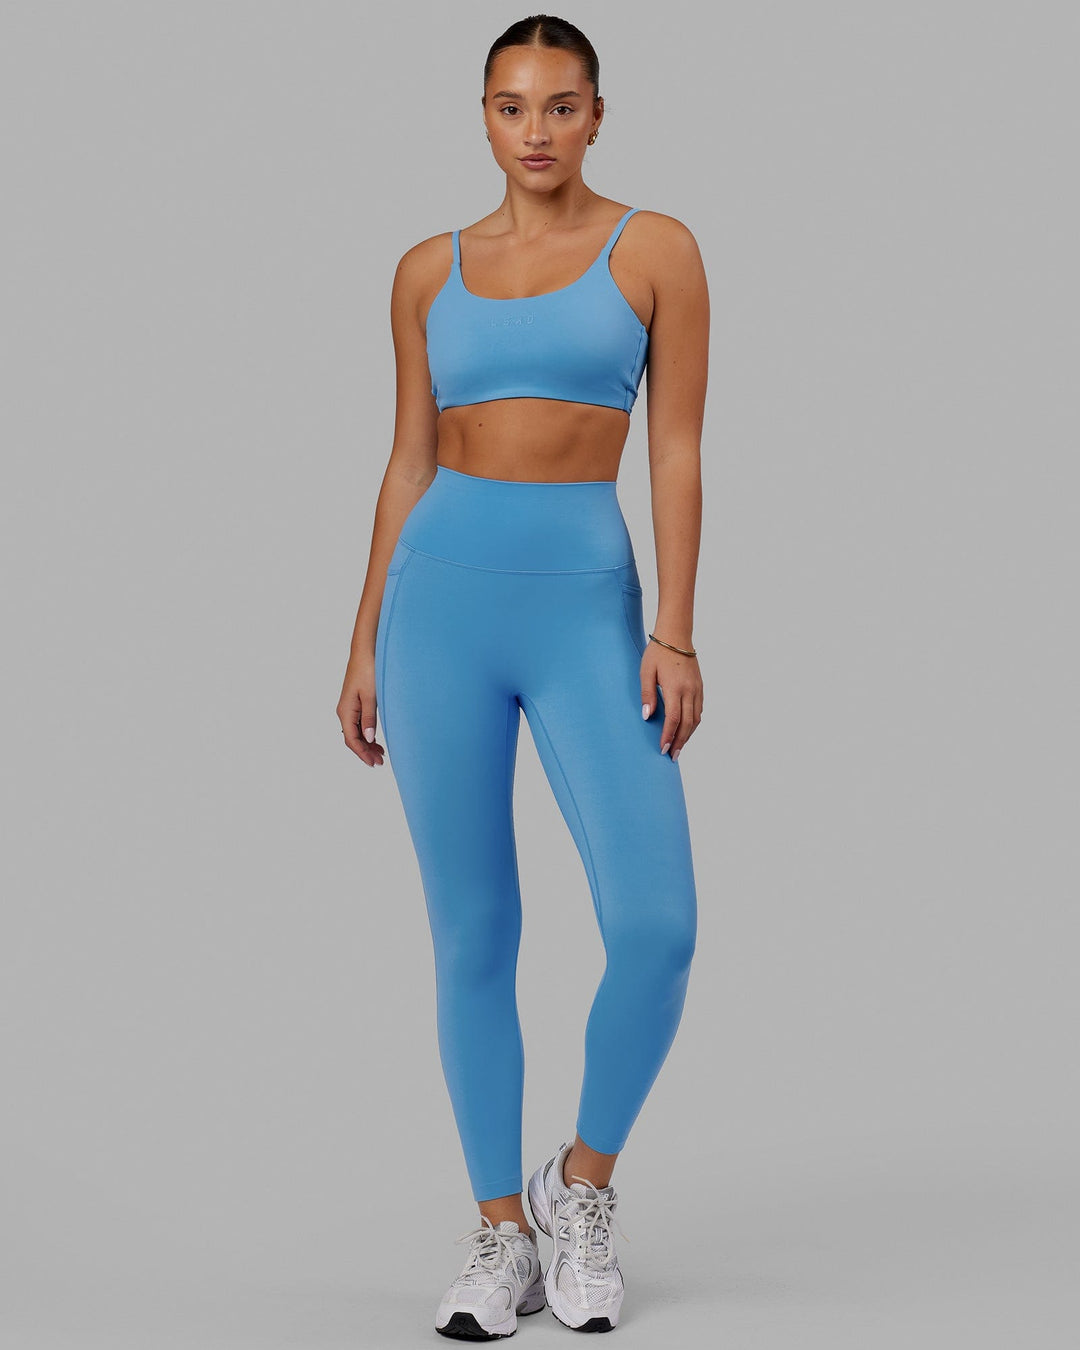 Elixir 7/8 Length Tights With Pockets - Azure Blue